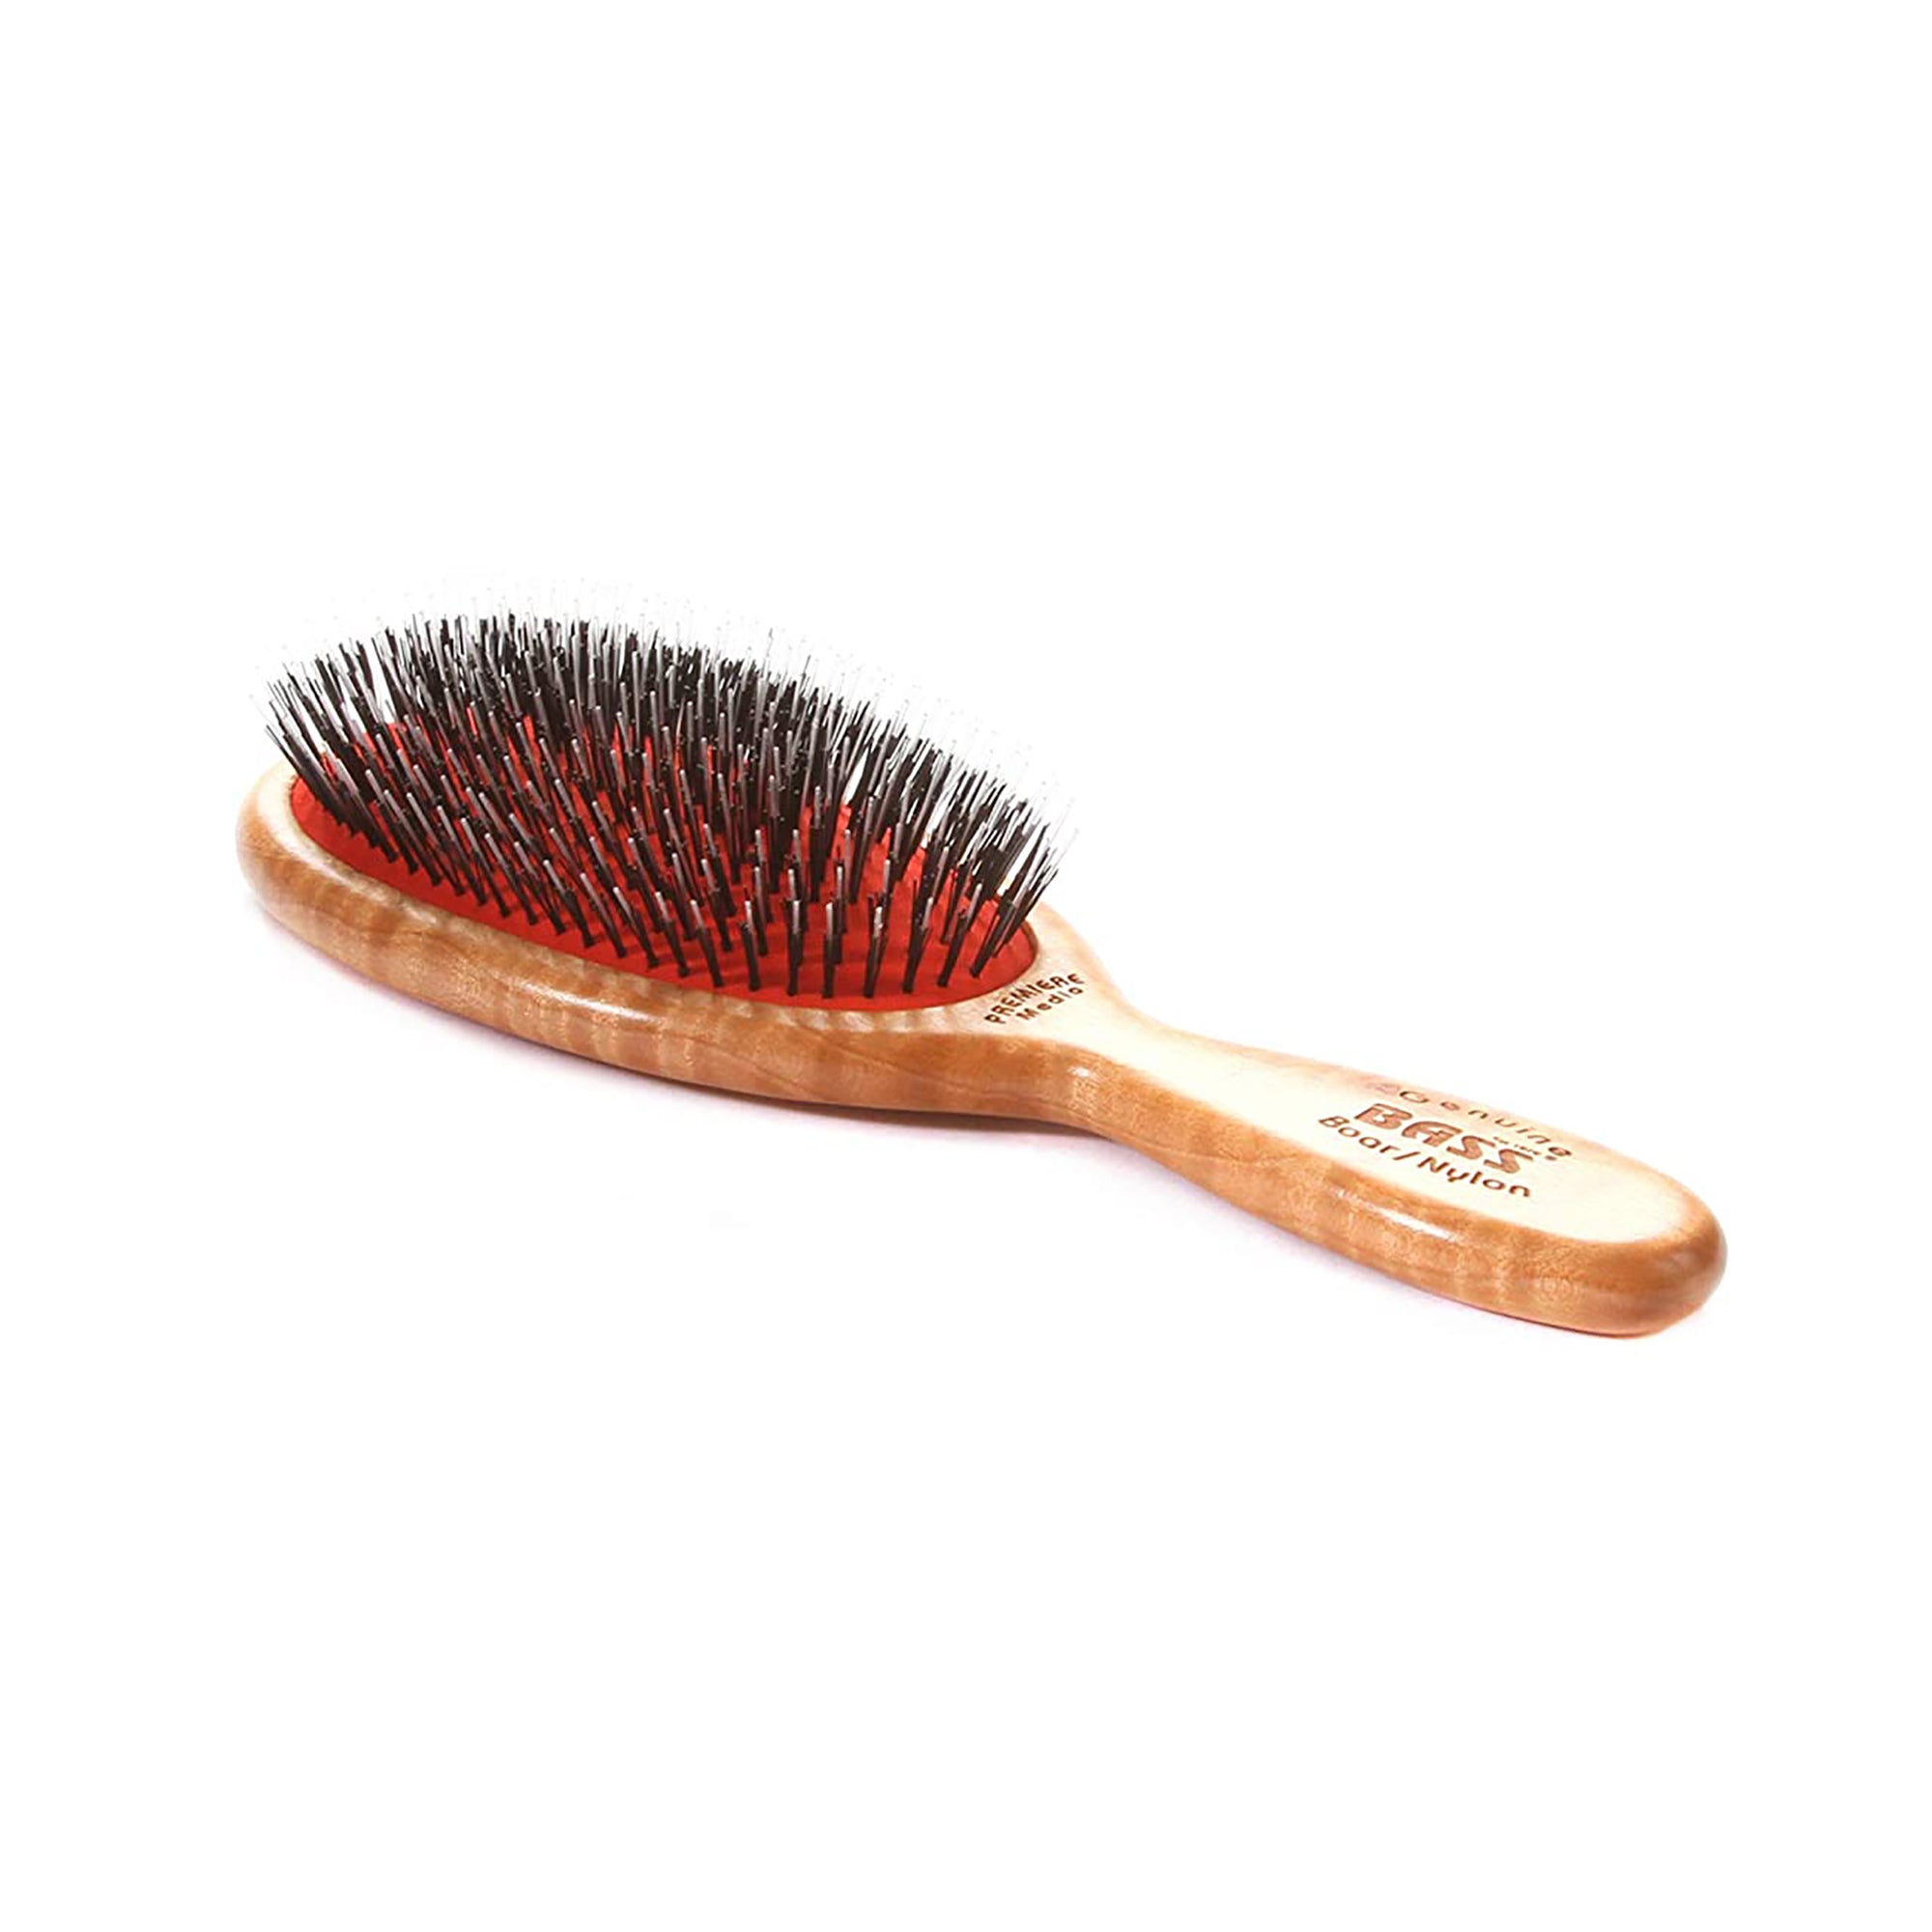 Bass Brushes Premiere Series PMD | Medio Oval with Ultra Premium Natural Bristle + Nylon Pin / PMD